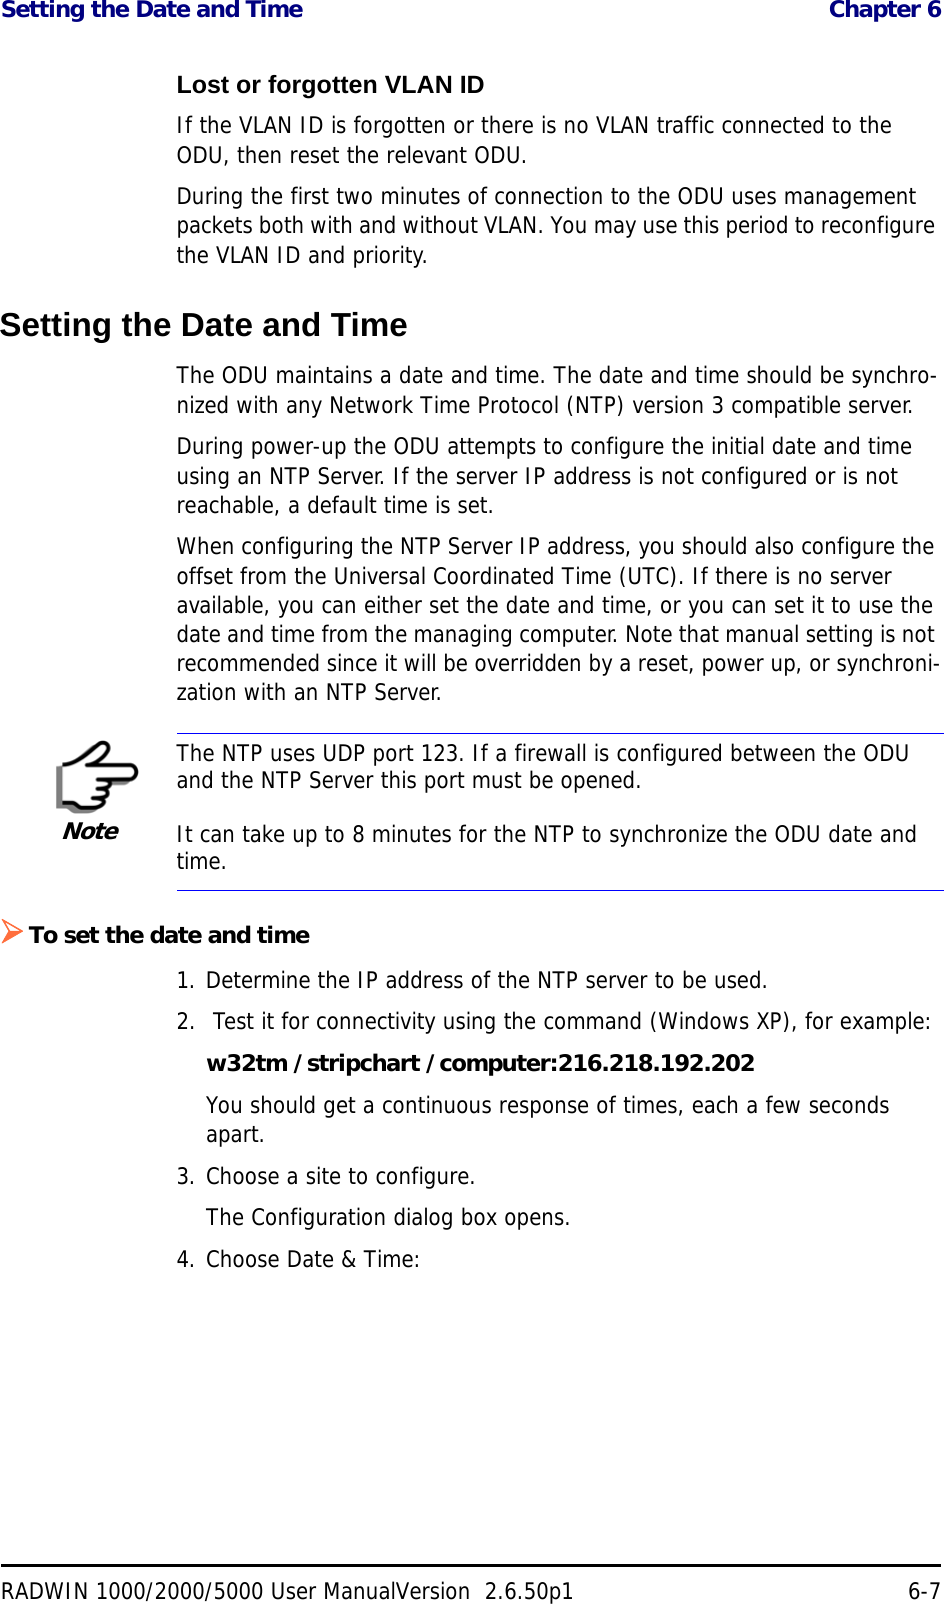 Setting the Date and Time  Chapter 6RADWIN 1000/2000/5000 User ManualVersion  2.6.50p1 6-7Lost or forgotten VLAN IDIf the VLAN ID is forgotten or there is no VLAN traffic connected to the ODU, then reset the relevant ODU.During the first two minutes of connection to the ODU uses management packets both with and without VLAN. You may use this period to reconfigure the VLAN ID and priority.Setting the Date and TimeThe ODU maintains a date and time. The date and time should be synchro-nized with any Network Time Protocol (NTP) version 3 compatible server.During power-up the ODU attempts to configure the initial date and time using an NTP Server. If the server IP address is not configured or is not reachable, a default time is set.When configuring the NTP Server IP address, you should also configure the offset from the Universal Coordinated Time (UTC). If there is no server available, you can either set the date and time, or you can set it to use the date and time from the managing computer. Note that manual setting is not recommended since it will be overridden by a reset, power up, or synchroni-zation with an NTP Server.To set the date and time1. Determine the IP address of the NTP server to be used.2.  Test it for connectivity using the command (Windows XP), for example:w32tm /stripchart /computer:216.218.192.202You should get a continuous response of times, each a few seconds apart.3. Choose a site to configure.The Configuration dialog box opens.4. Choose Date &amp; Time:NoteThe NTP uses UDP port 123. If a firewall is configured between the ODU and the NTP Server this port must be opened.It can take up to 8 minutes for the NTP to synchronize the ODU date and time.